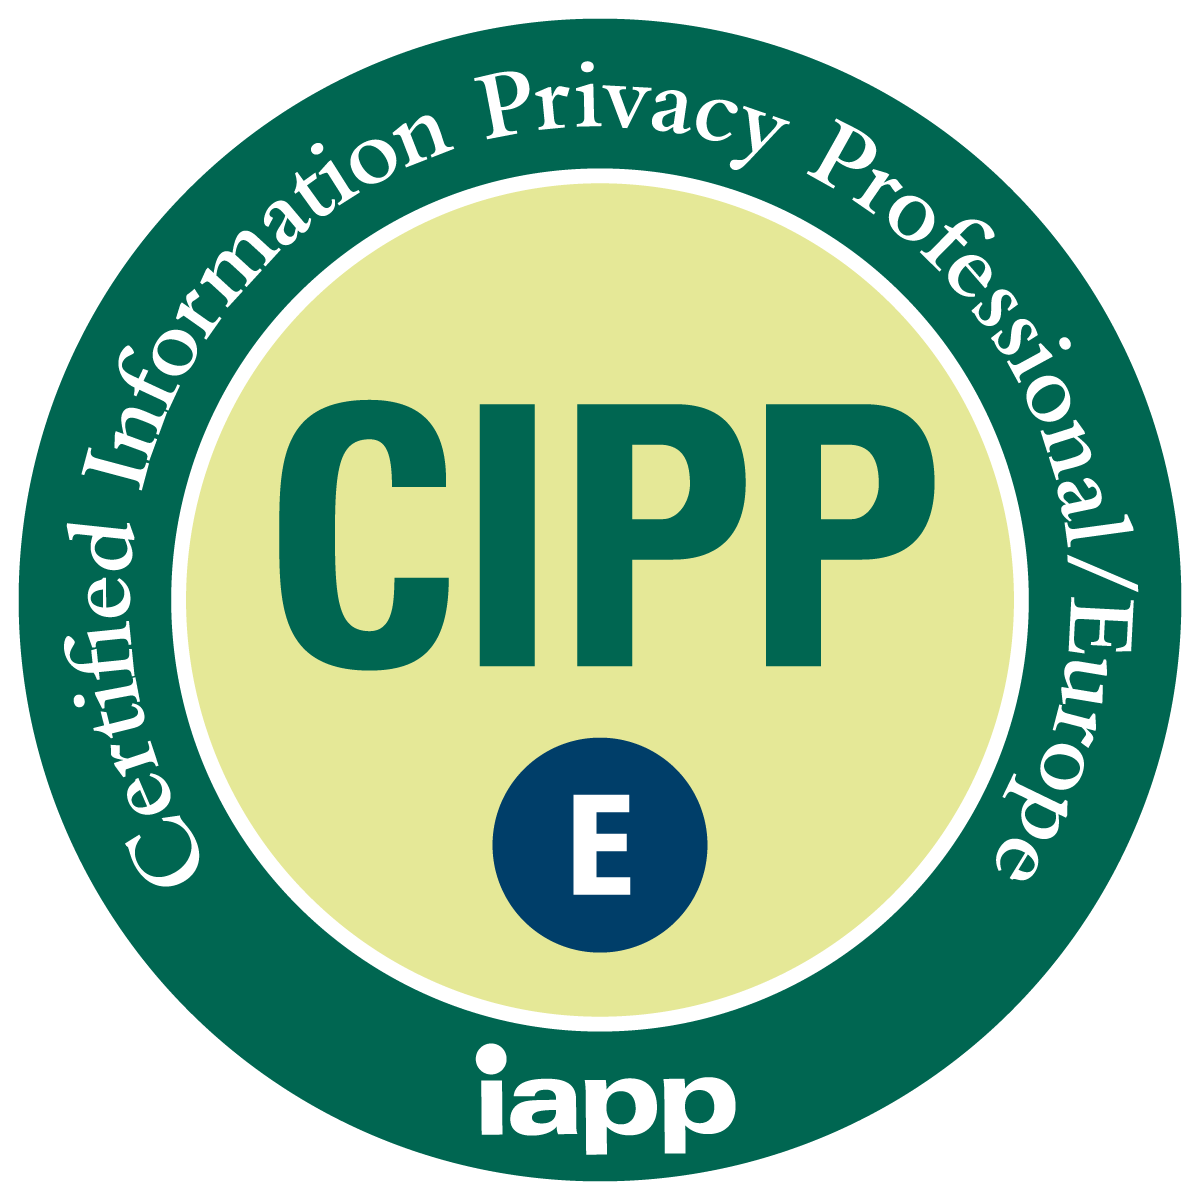 IAPP - CIPP/E - Certified Information Privacy Professional - Europe